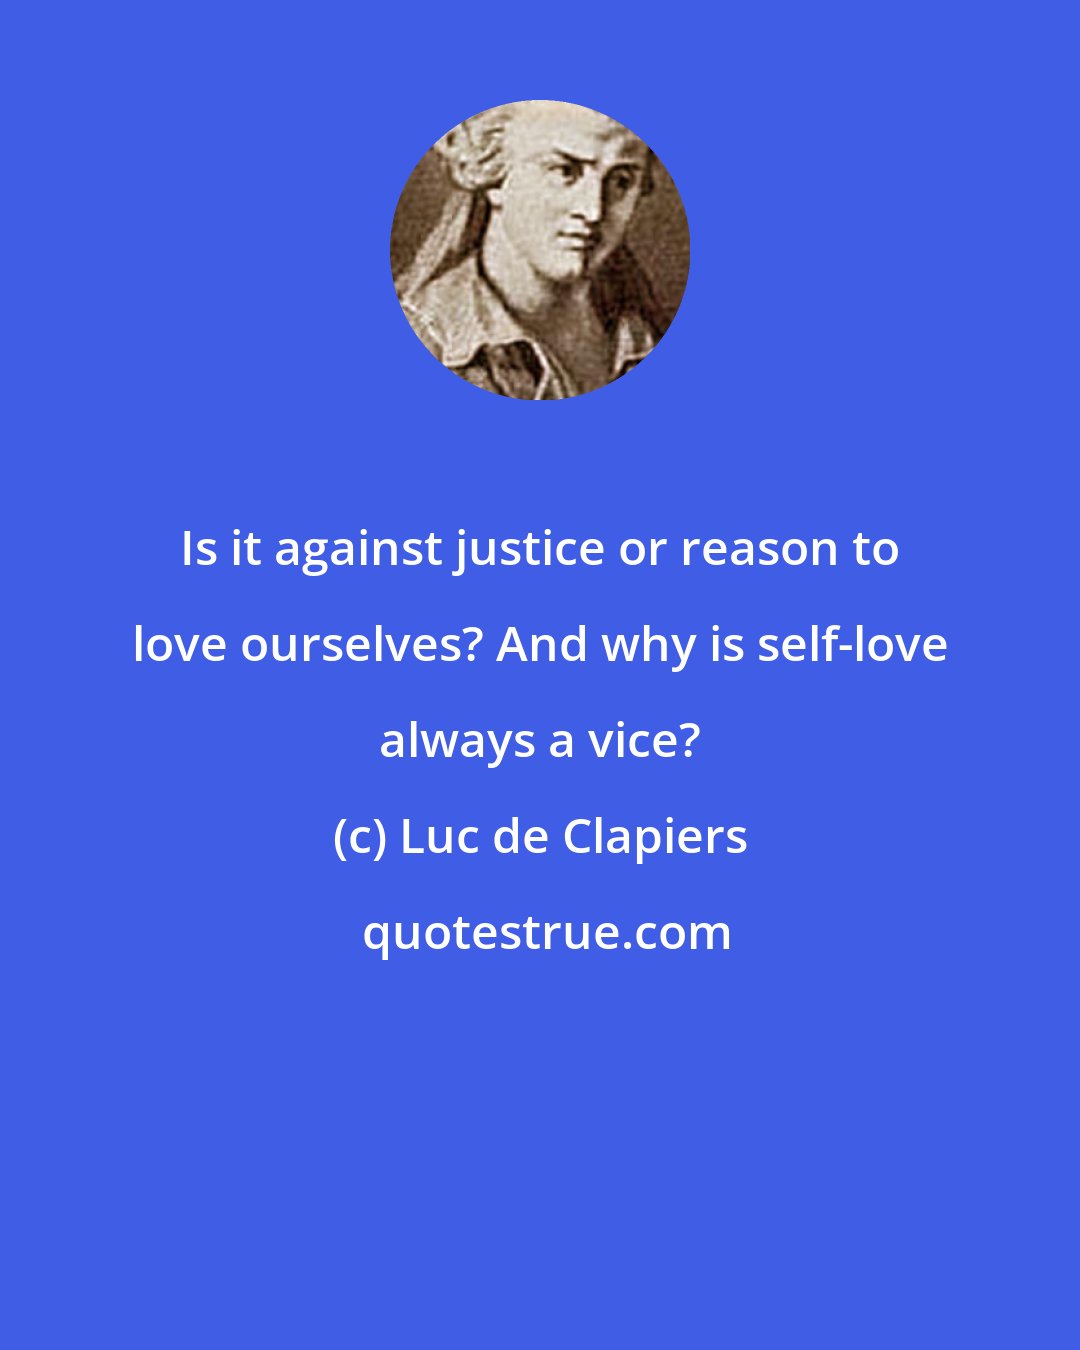 Luc de Clapiers: Is it against justice or reason to love ourselves? And why is self-love always a vice?